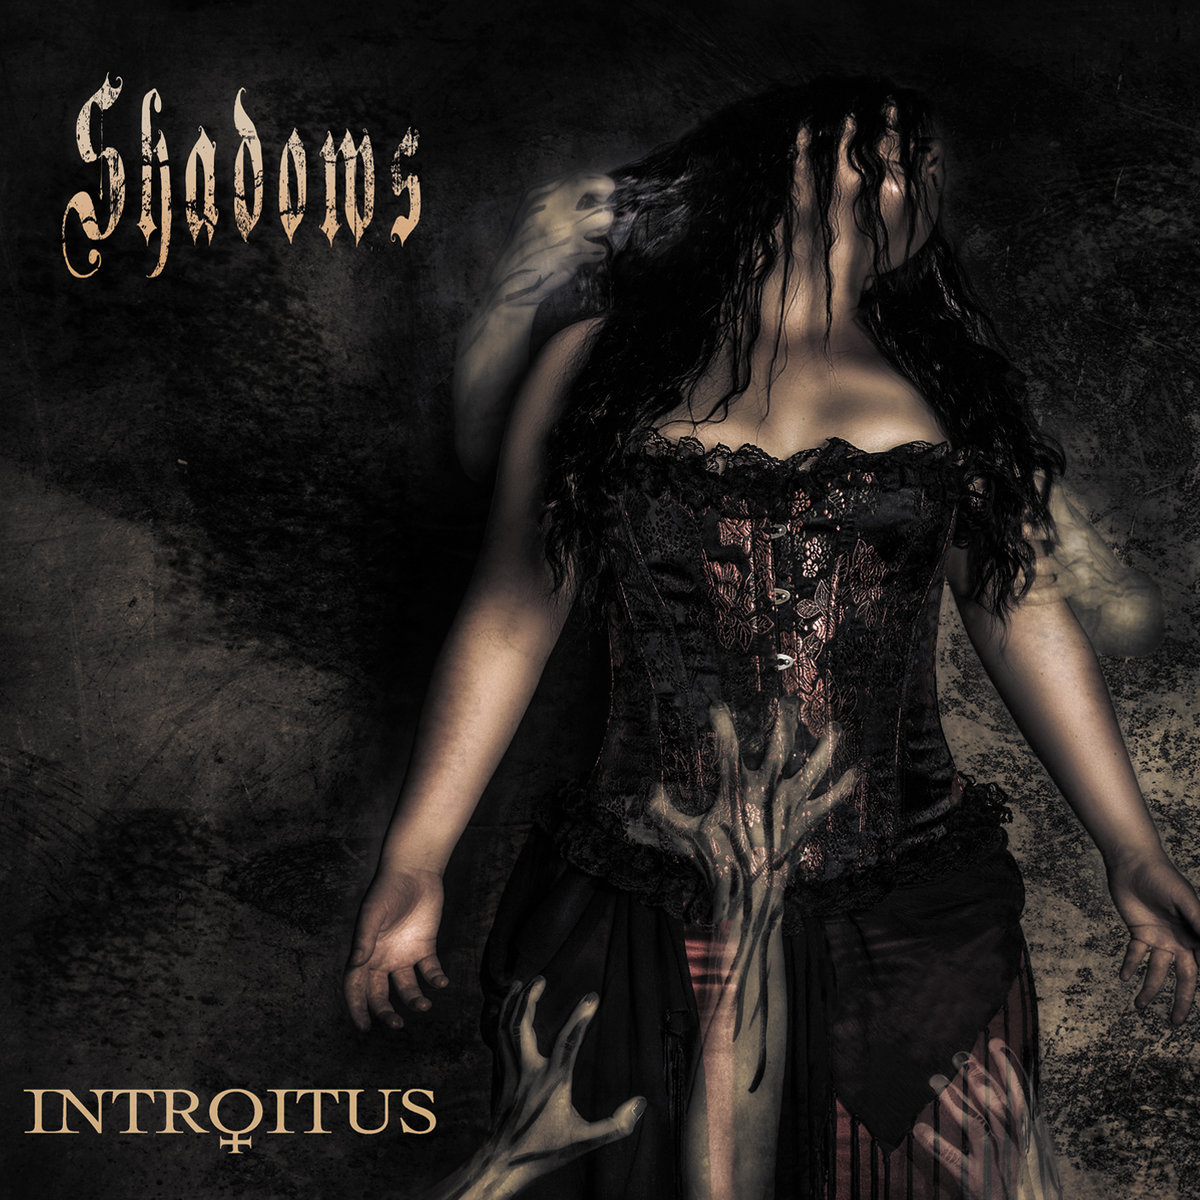 NP: Swedish band Introitus released four Neo-Prog albums between 2007-2019, and all are worth a listen (Shadows is available on bandcamp for 5 bucks)!
#NowPlaying #NeoProg #ProgRock